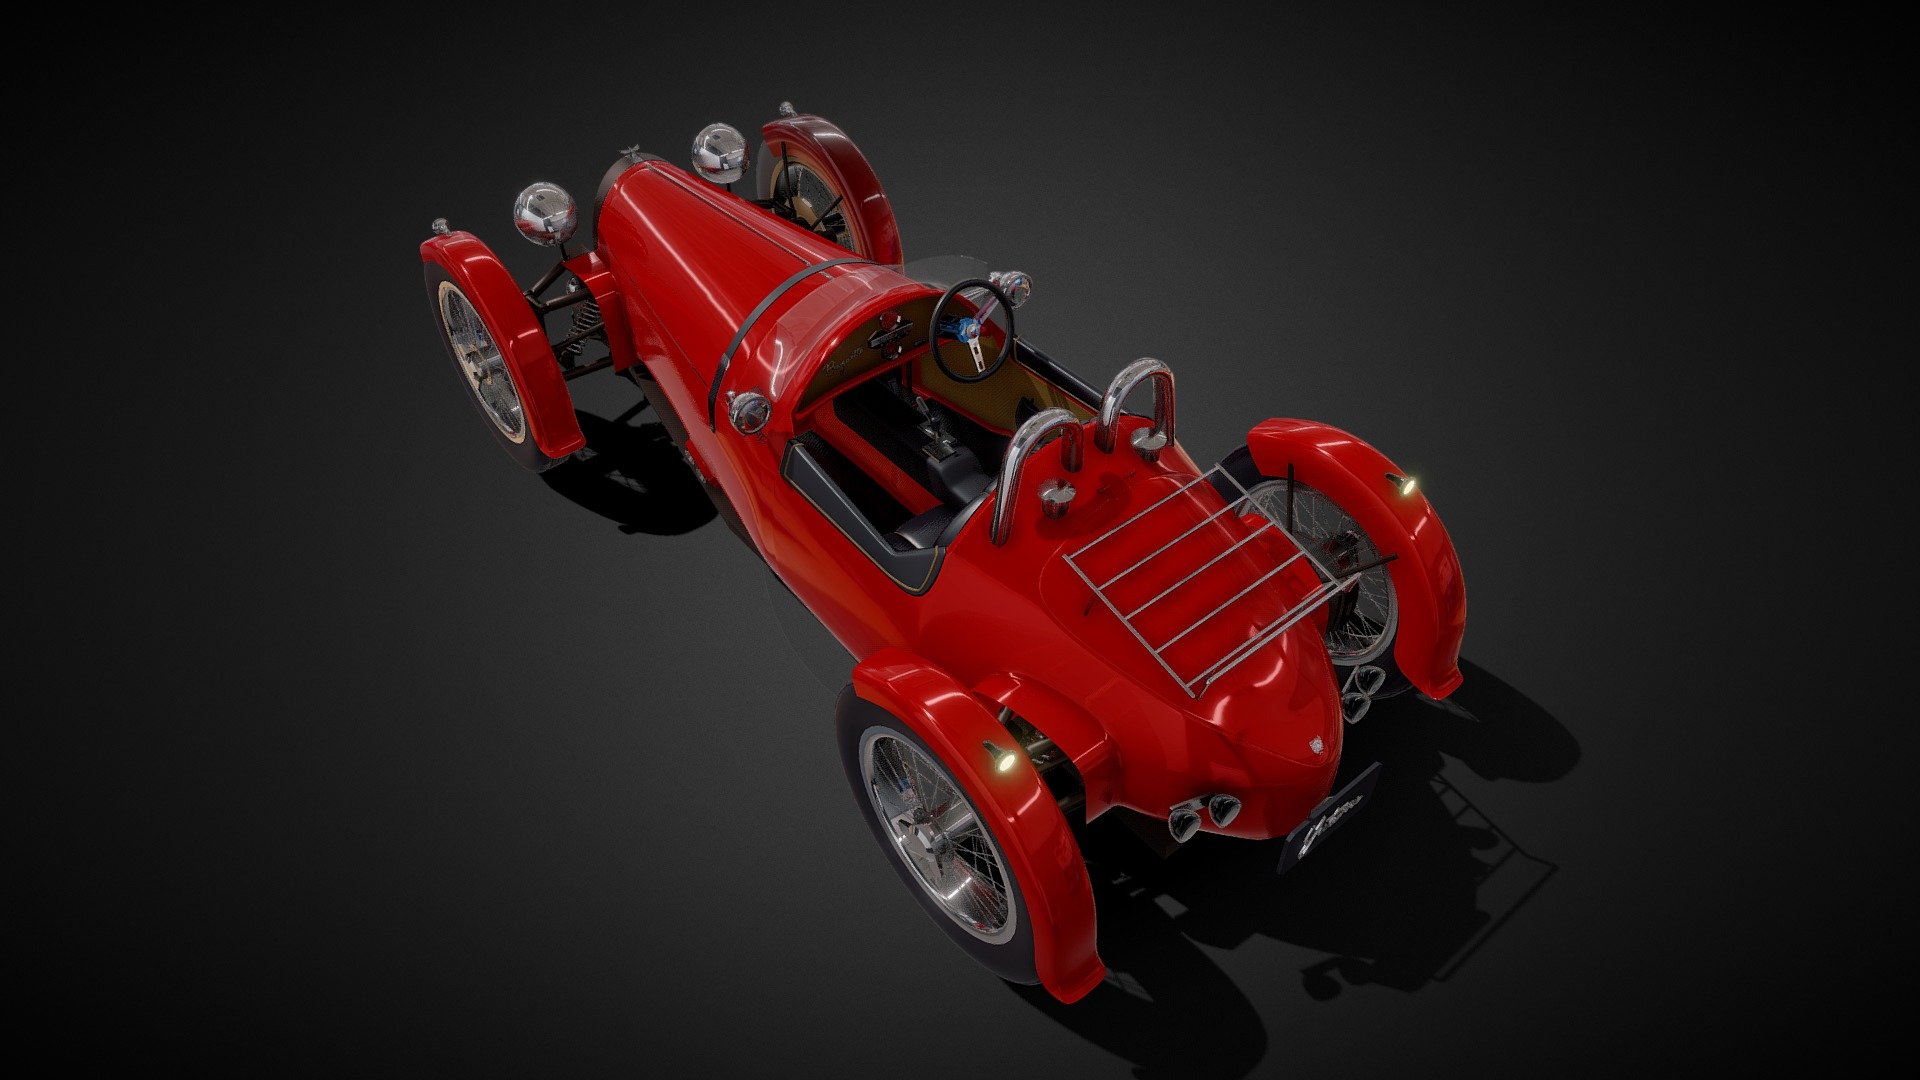 This is my old car concept, designed for a kit car with a vintage look that uses 2-3 cylinder modern motorcycle engines. I hope this model helps with your projects 3d model